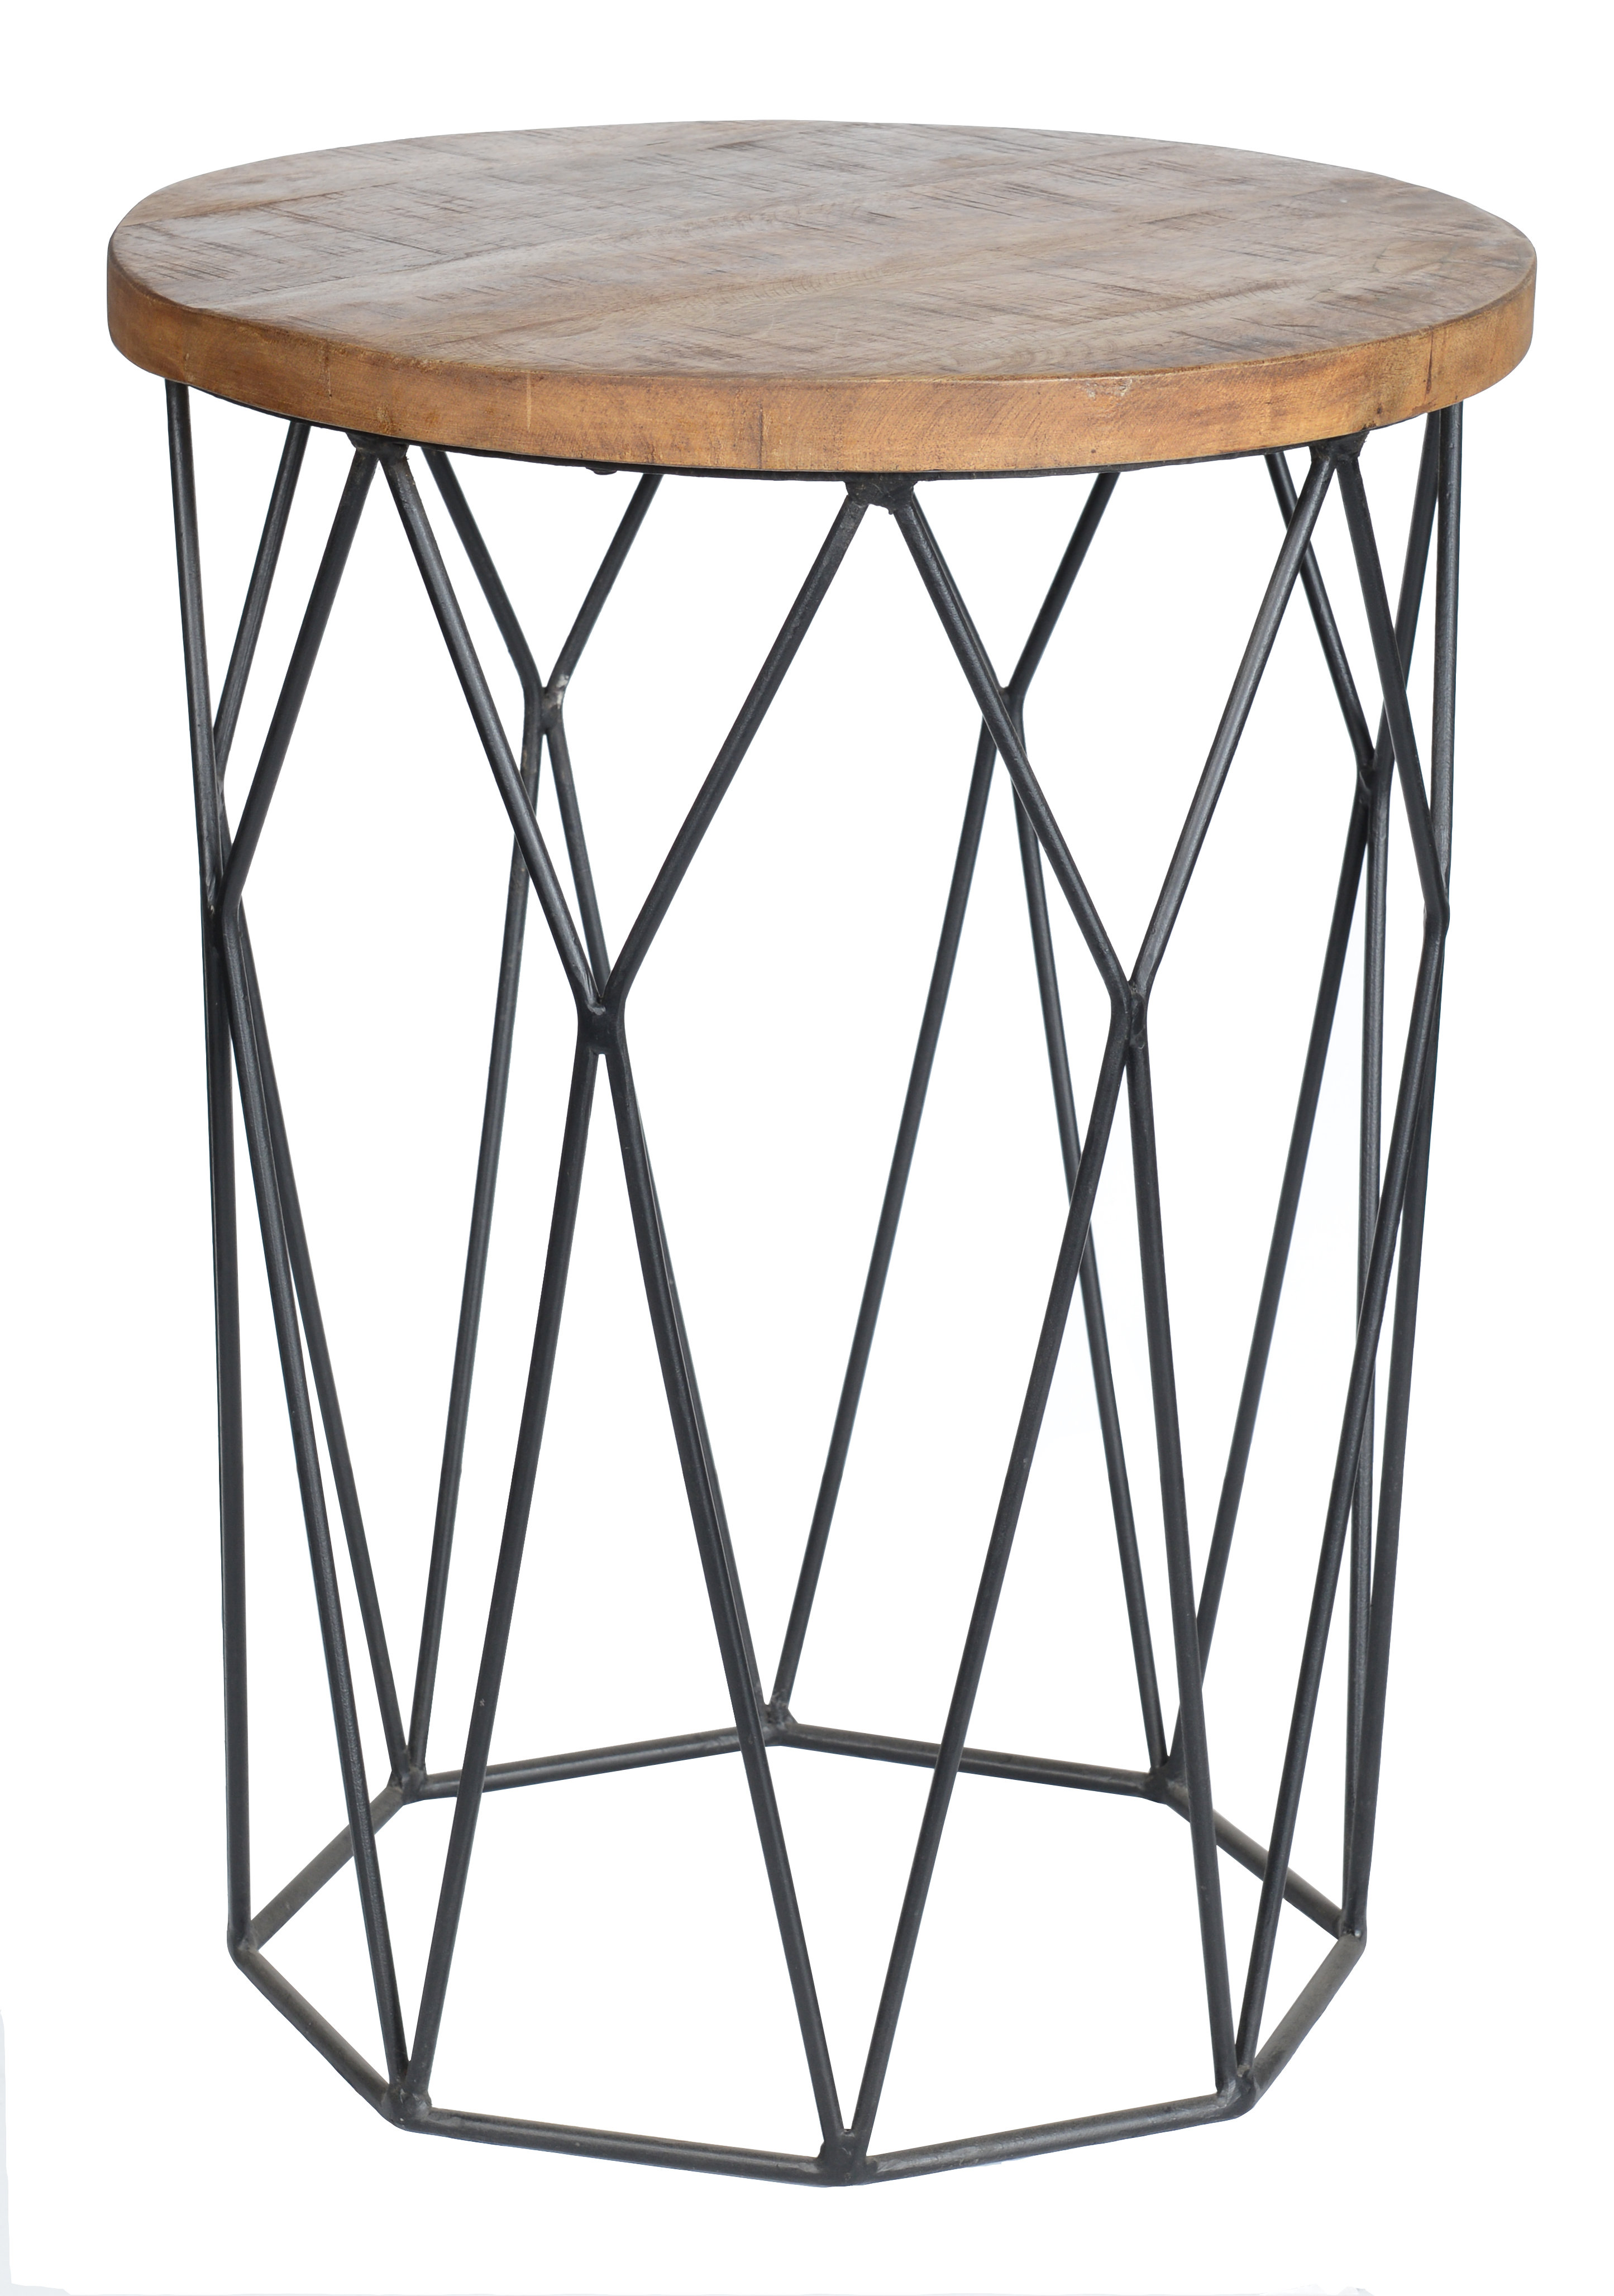 mercury row ahart end table reviews twisted mango wood accent outdoor battery lamps large grey clock ikea lighting nesting nightstand polka dot tablecloth inexpensive nightstands